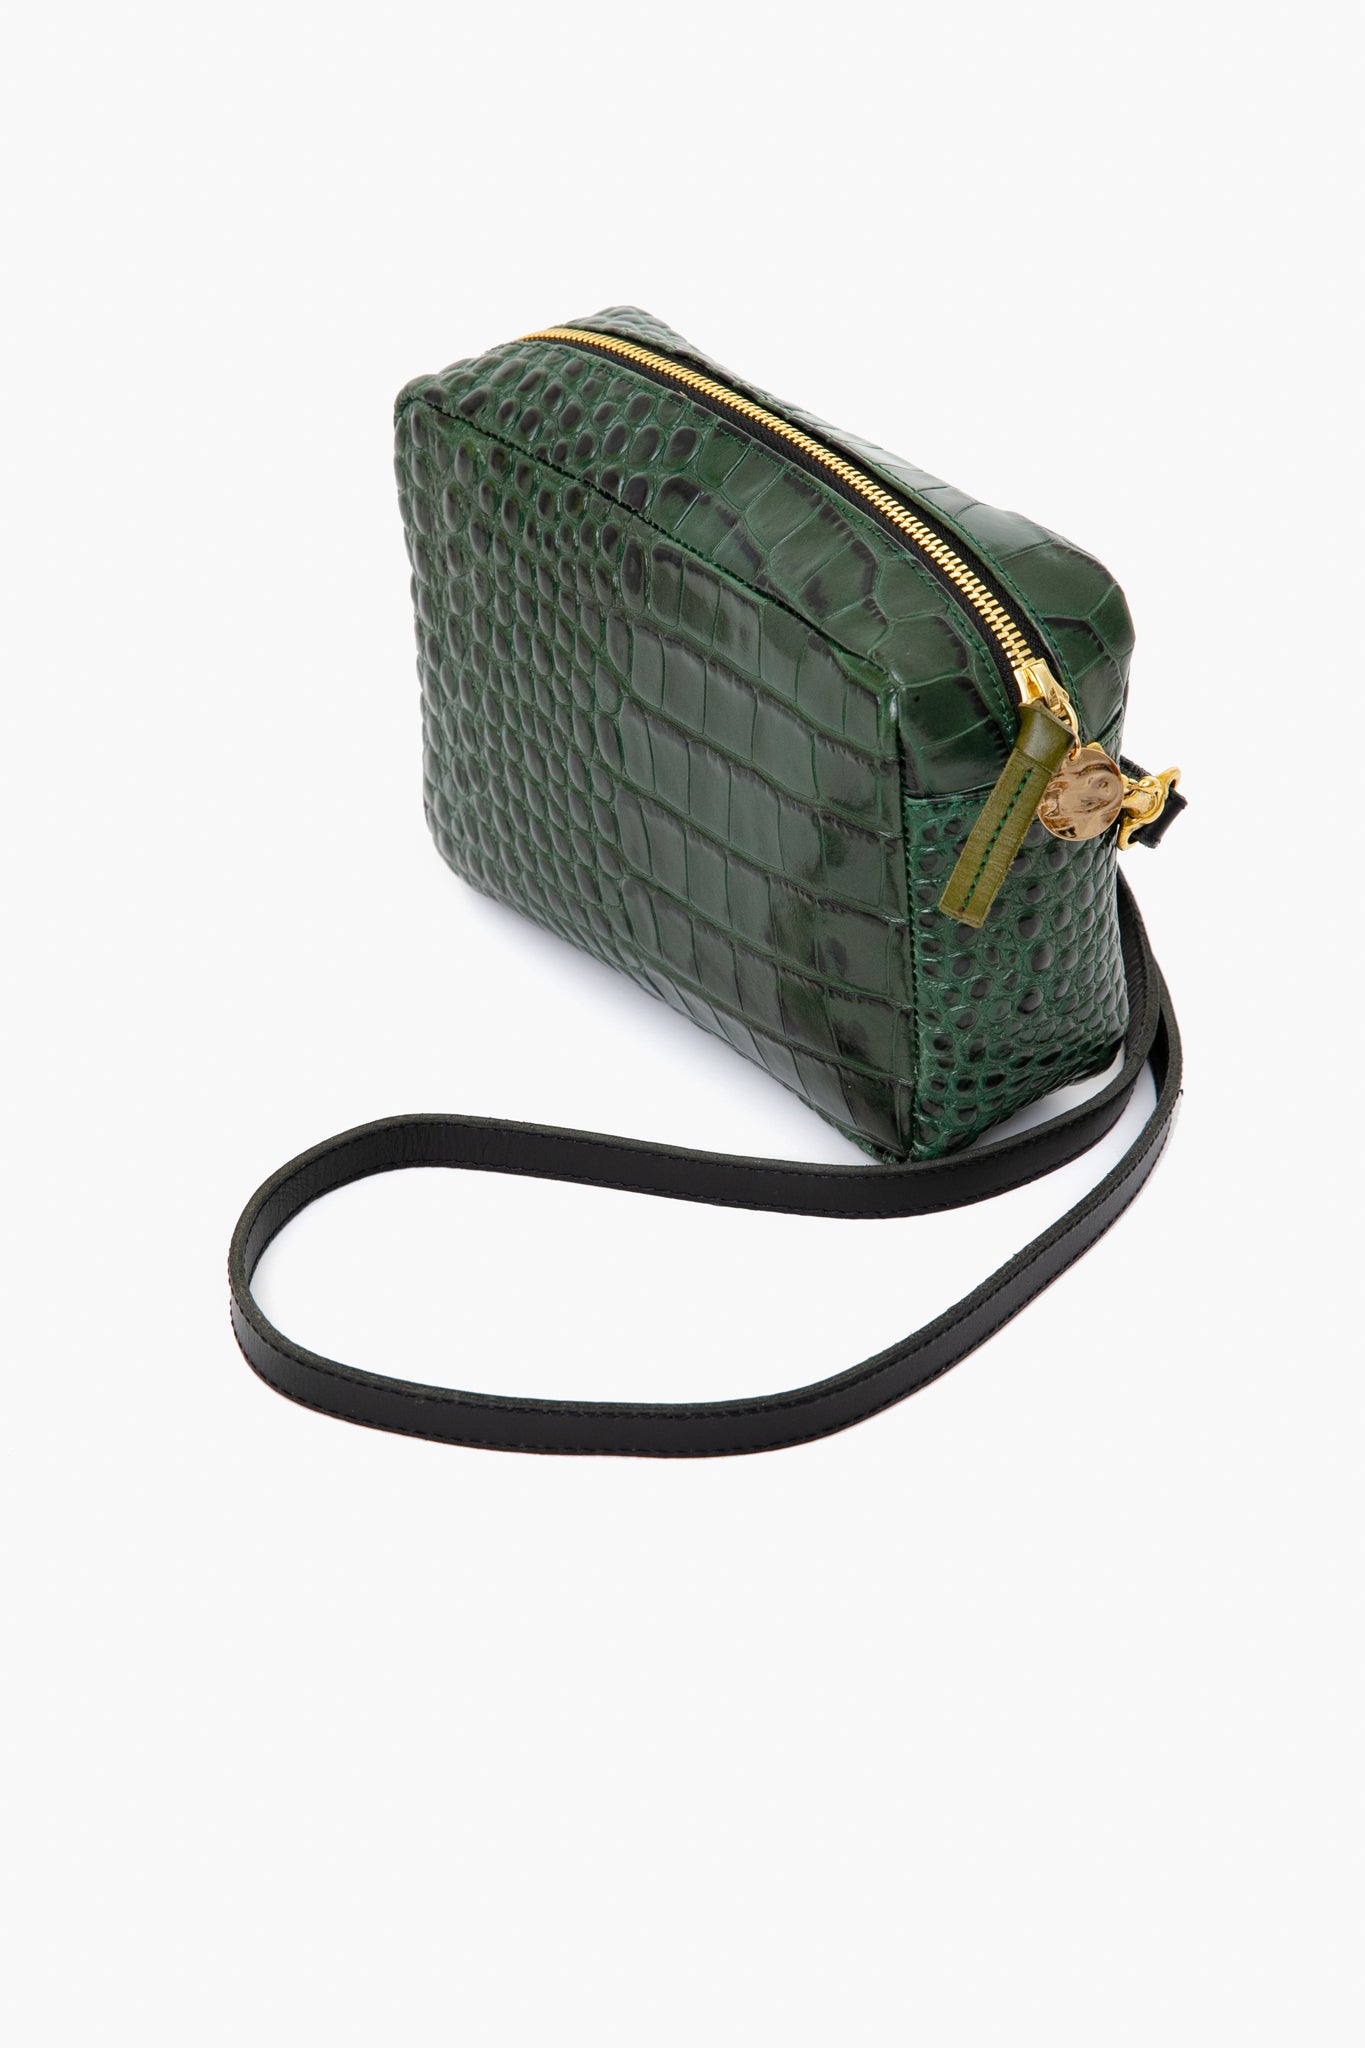 Clare V, Bags, Clare V Le Zip Sac Green Croco With